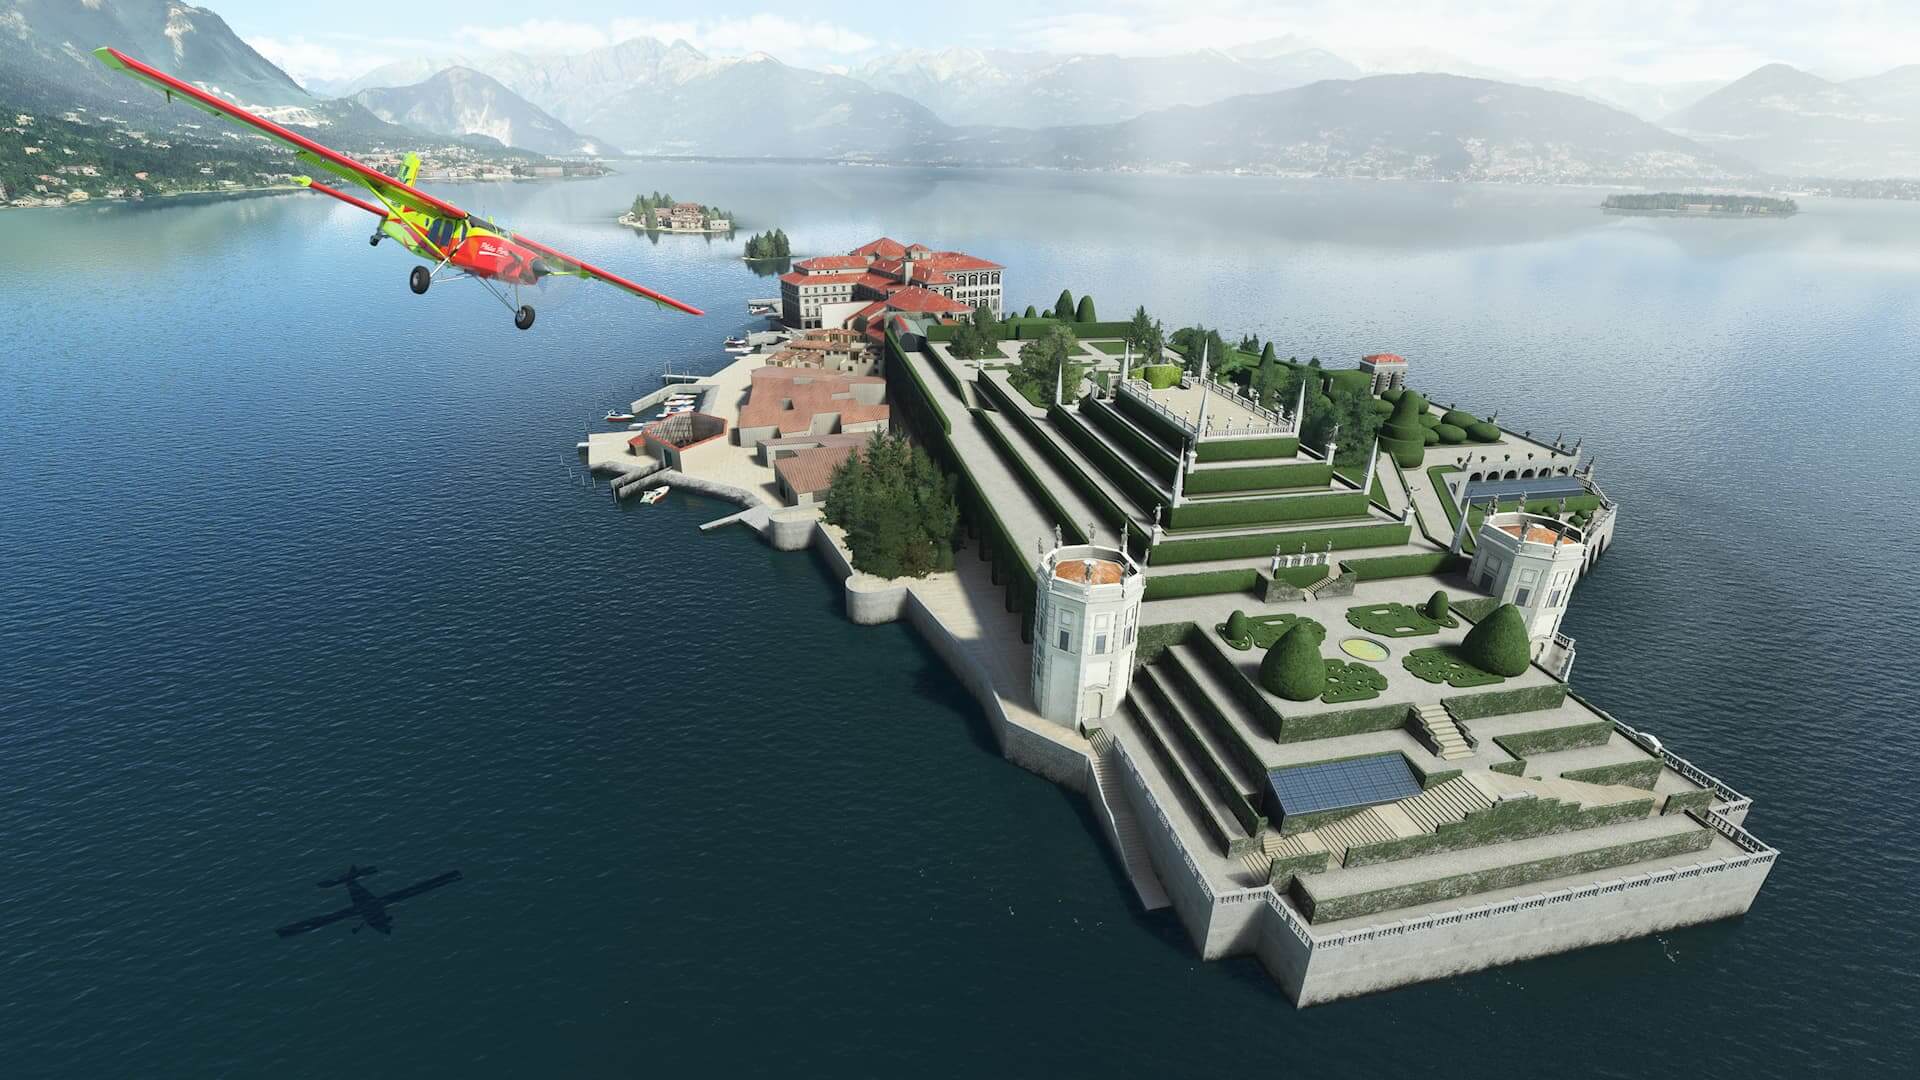 A red and yellow high wing propeller aircraft passes over palace gardens on an island